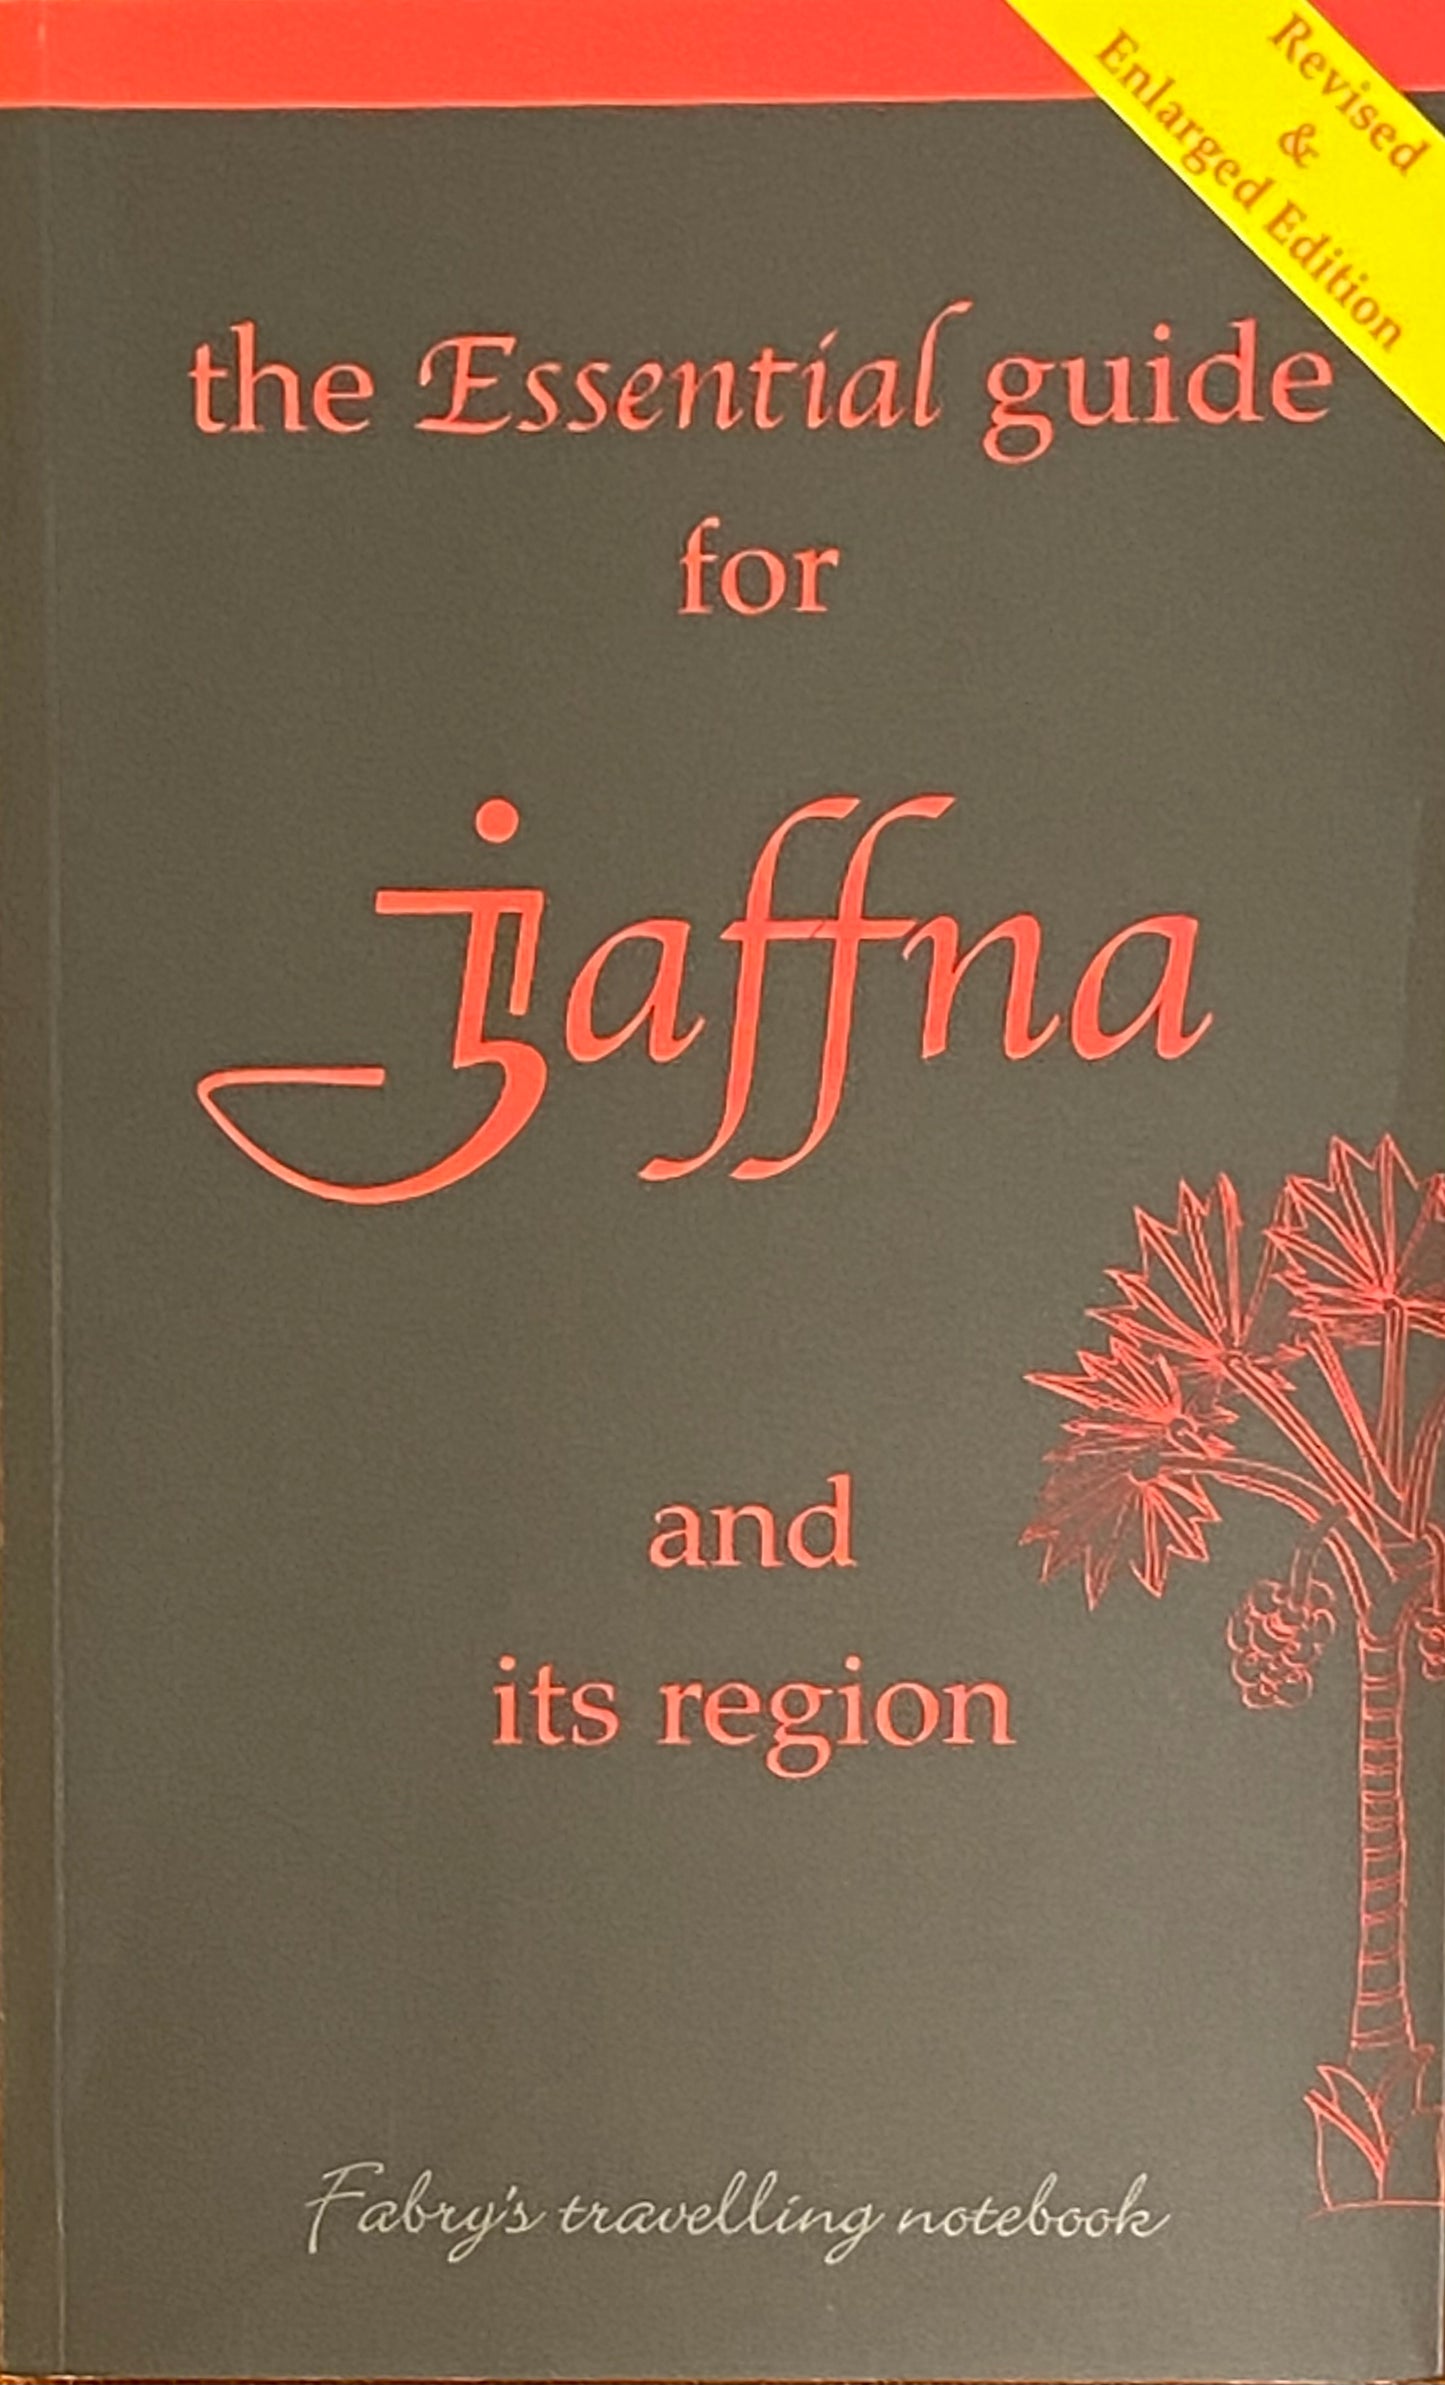 The Essential Guide for Jaffna and Its Region